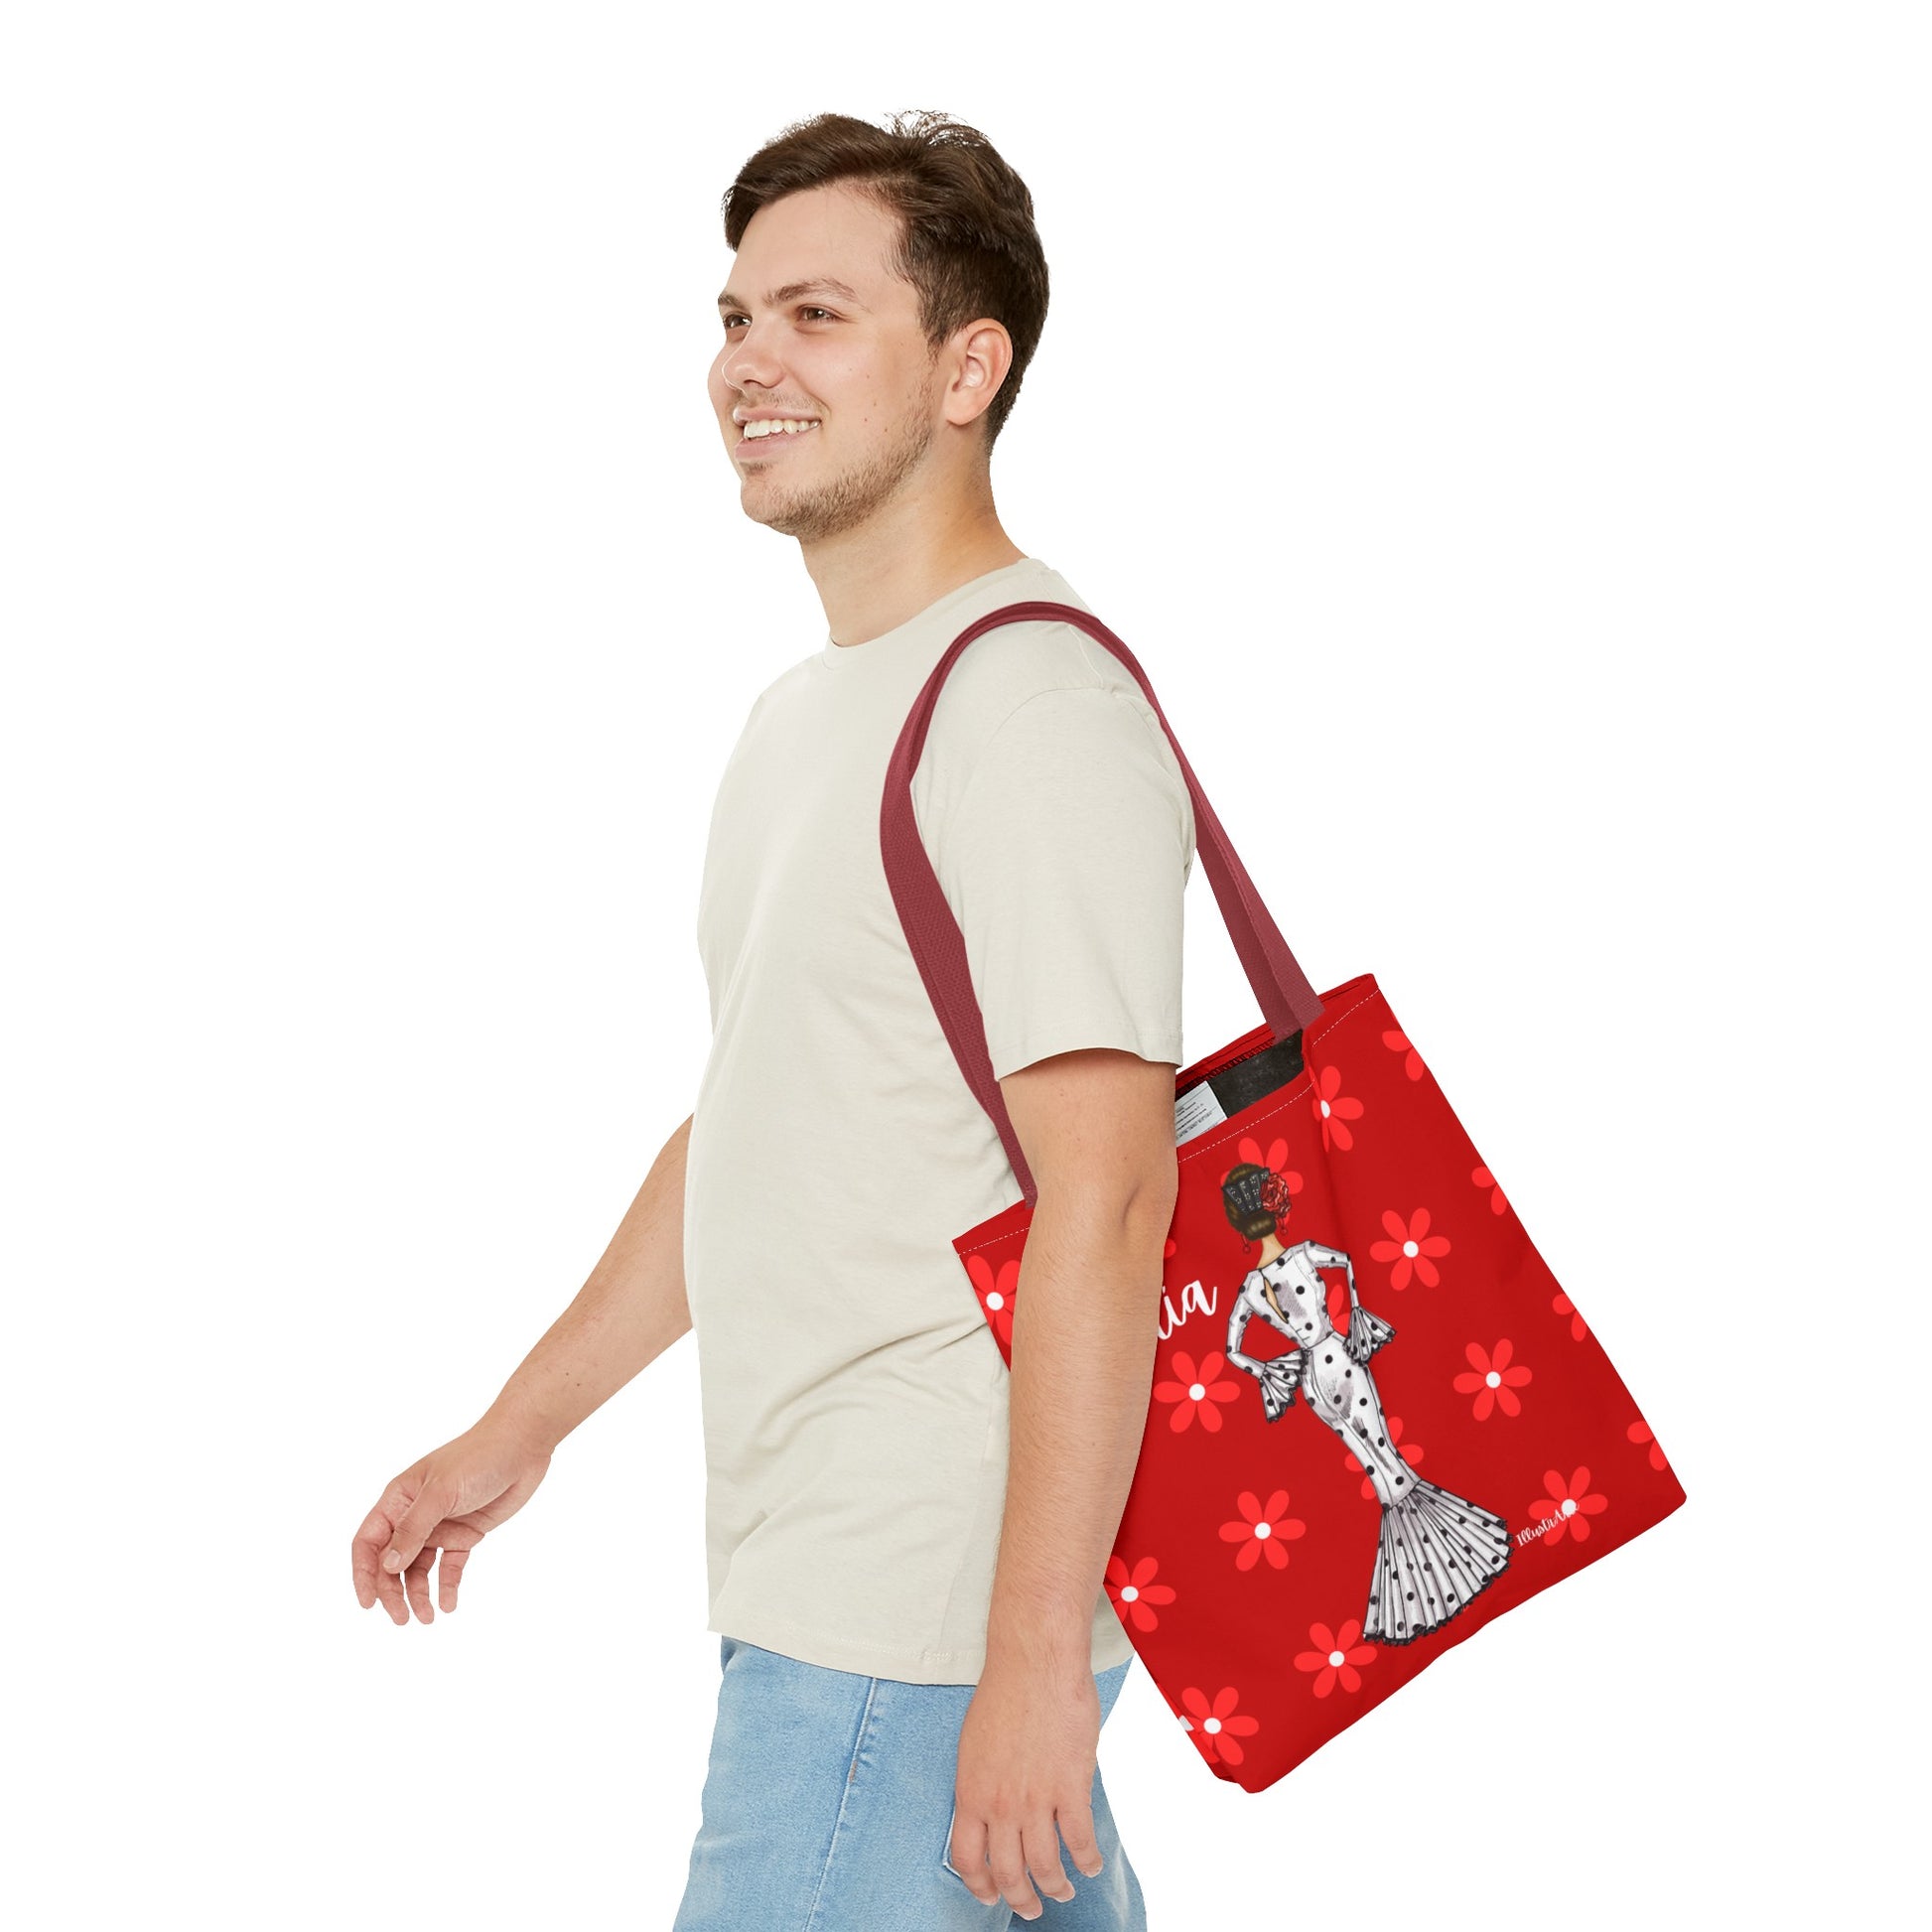 a man carrying a red bag with a dog on it